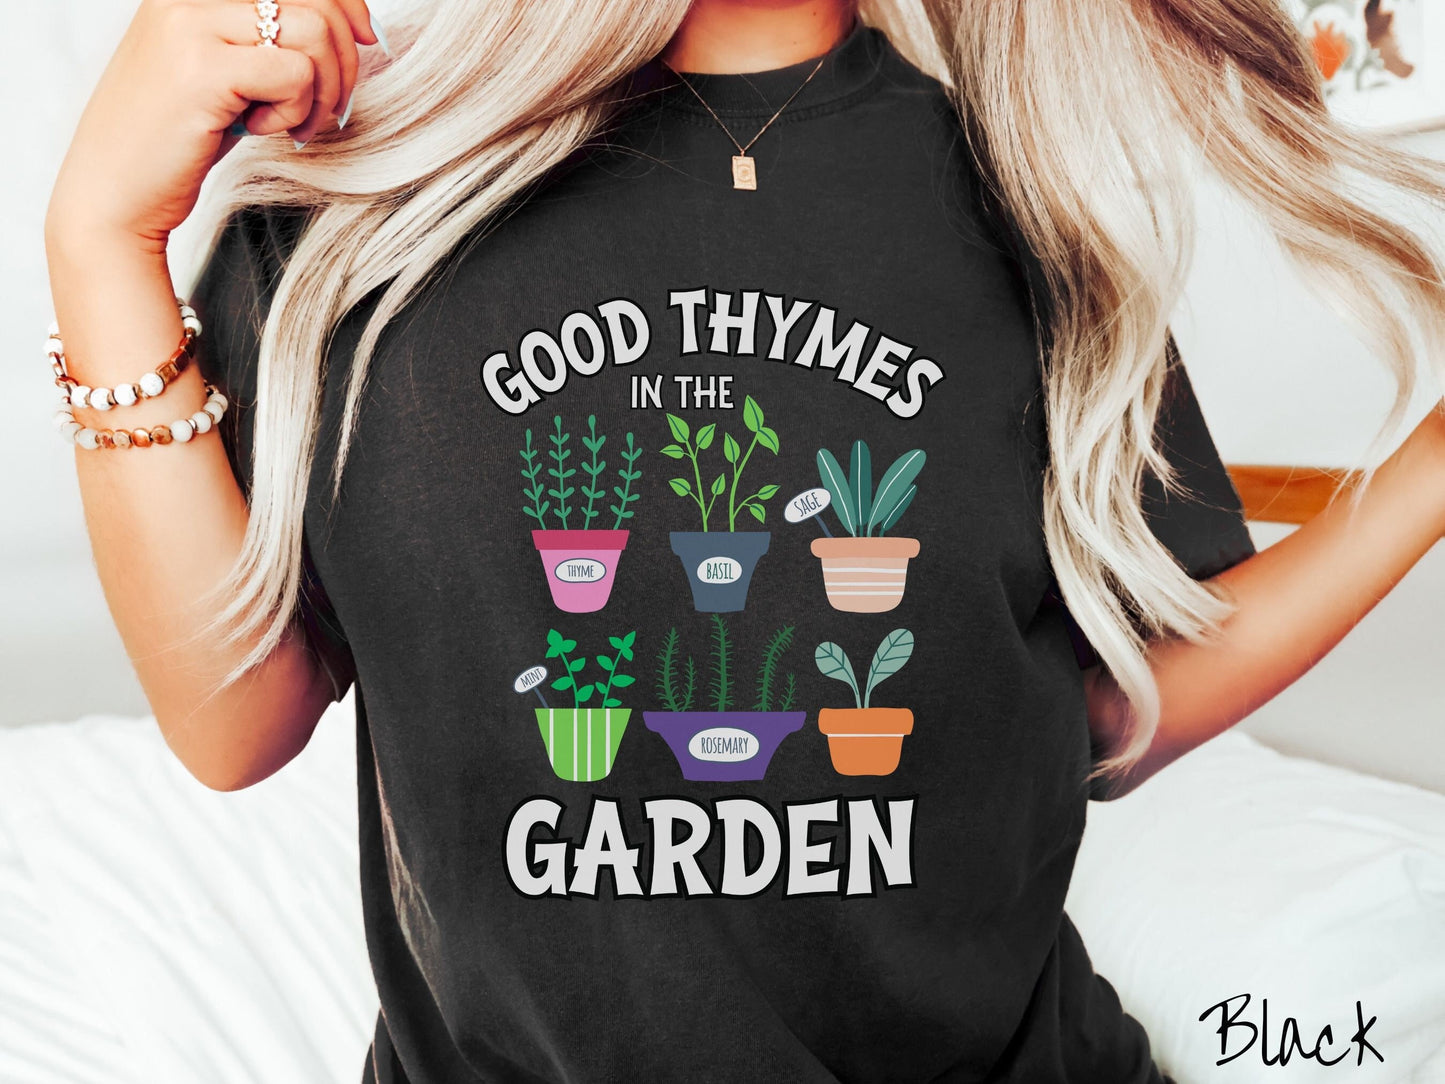 A woman wearing a cute, vintage black colored Comfort Colors t-shirt with the text Good Thymes in the Garden in white font. In between the text are different potted vegetables in colorful pots like thyme, basil, sage, and mint.